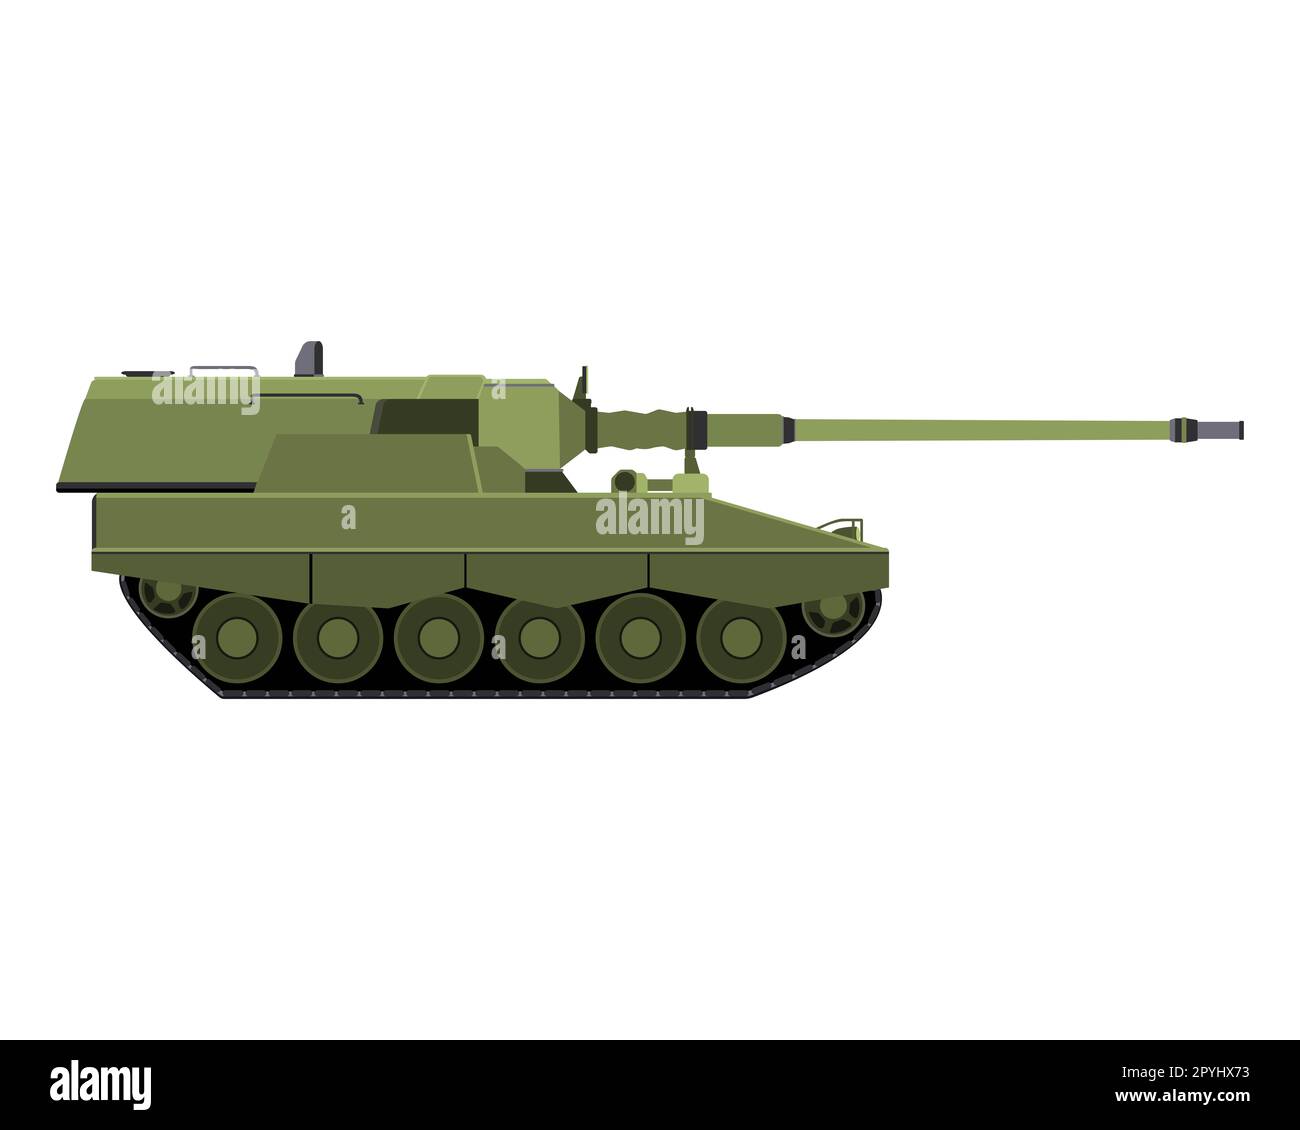 Self-propelled howitzer in flat style. German 155 mm Panzerhaubitze 2000. Military armored vehicle. Detailed colorful illustration isolated on white b Stock Photo